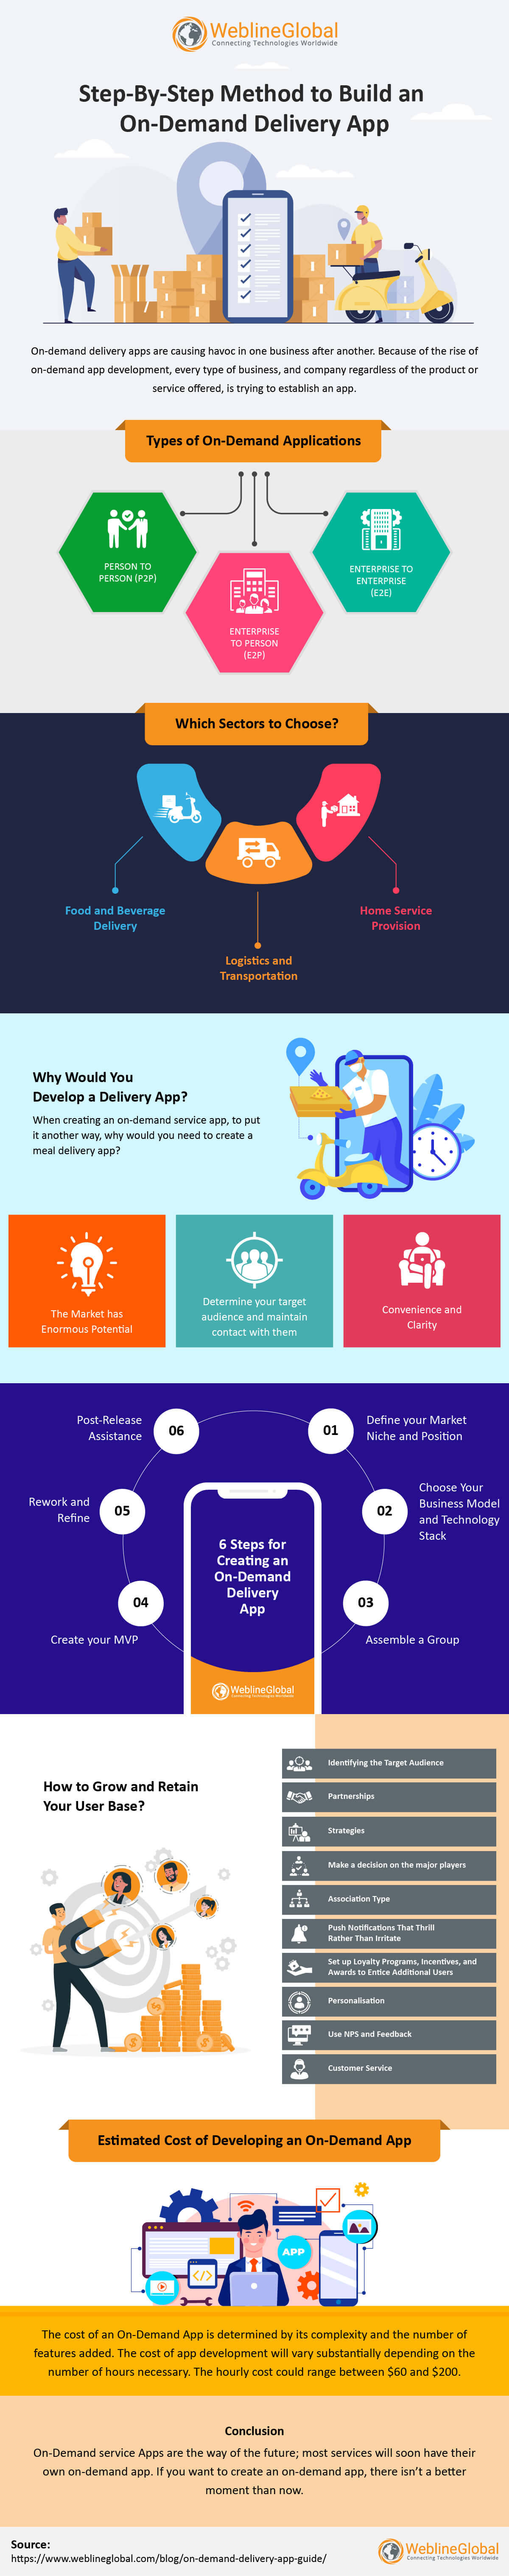 Guide to Choose The Right Technology Stack for Mobile App Development Infographic